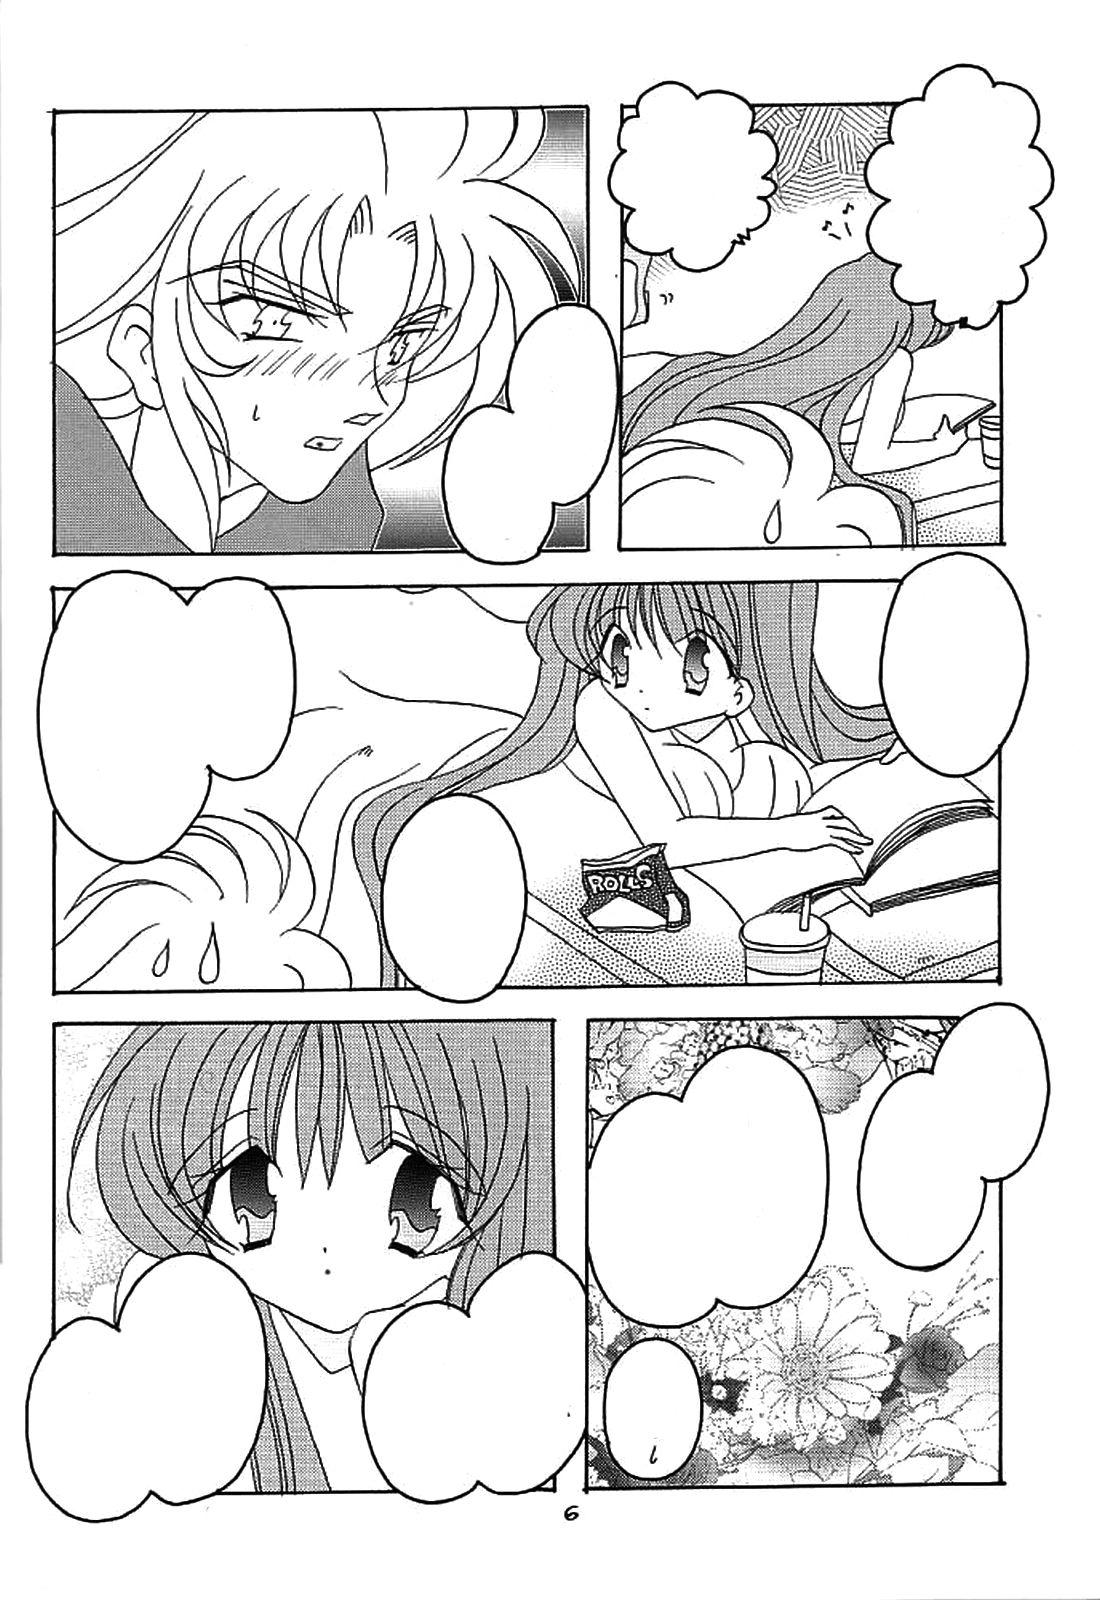 Three Some You are my Reason to Be 6 - Saint seiya Free Amature Porn - Page 5